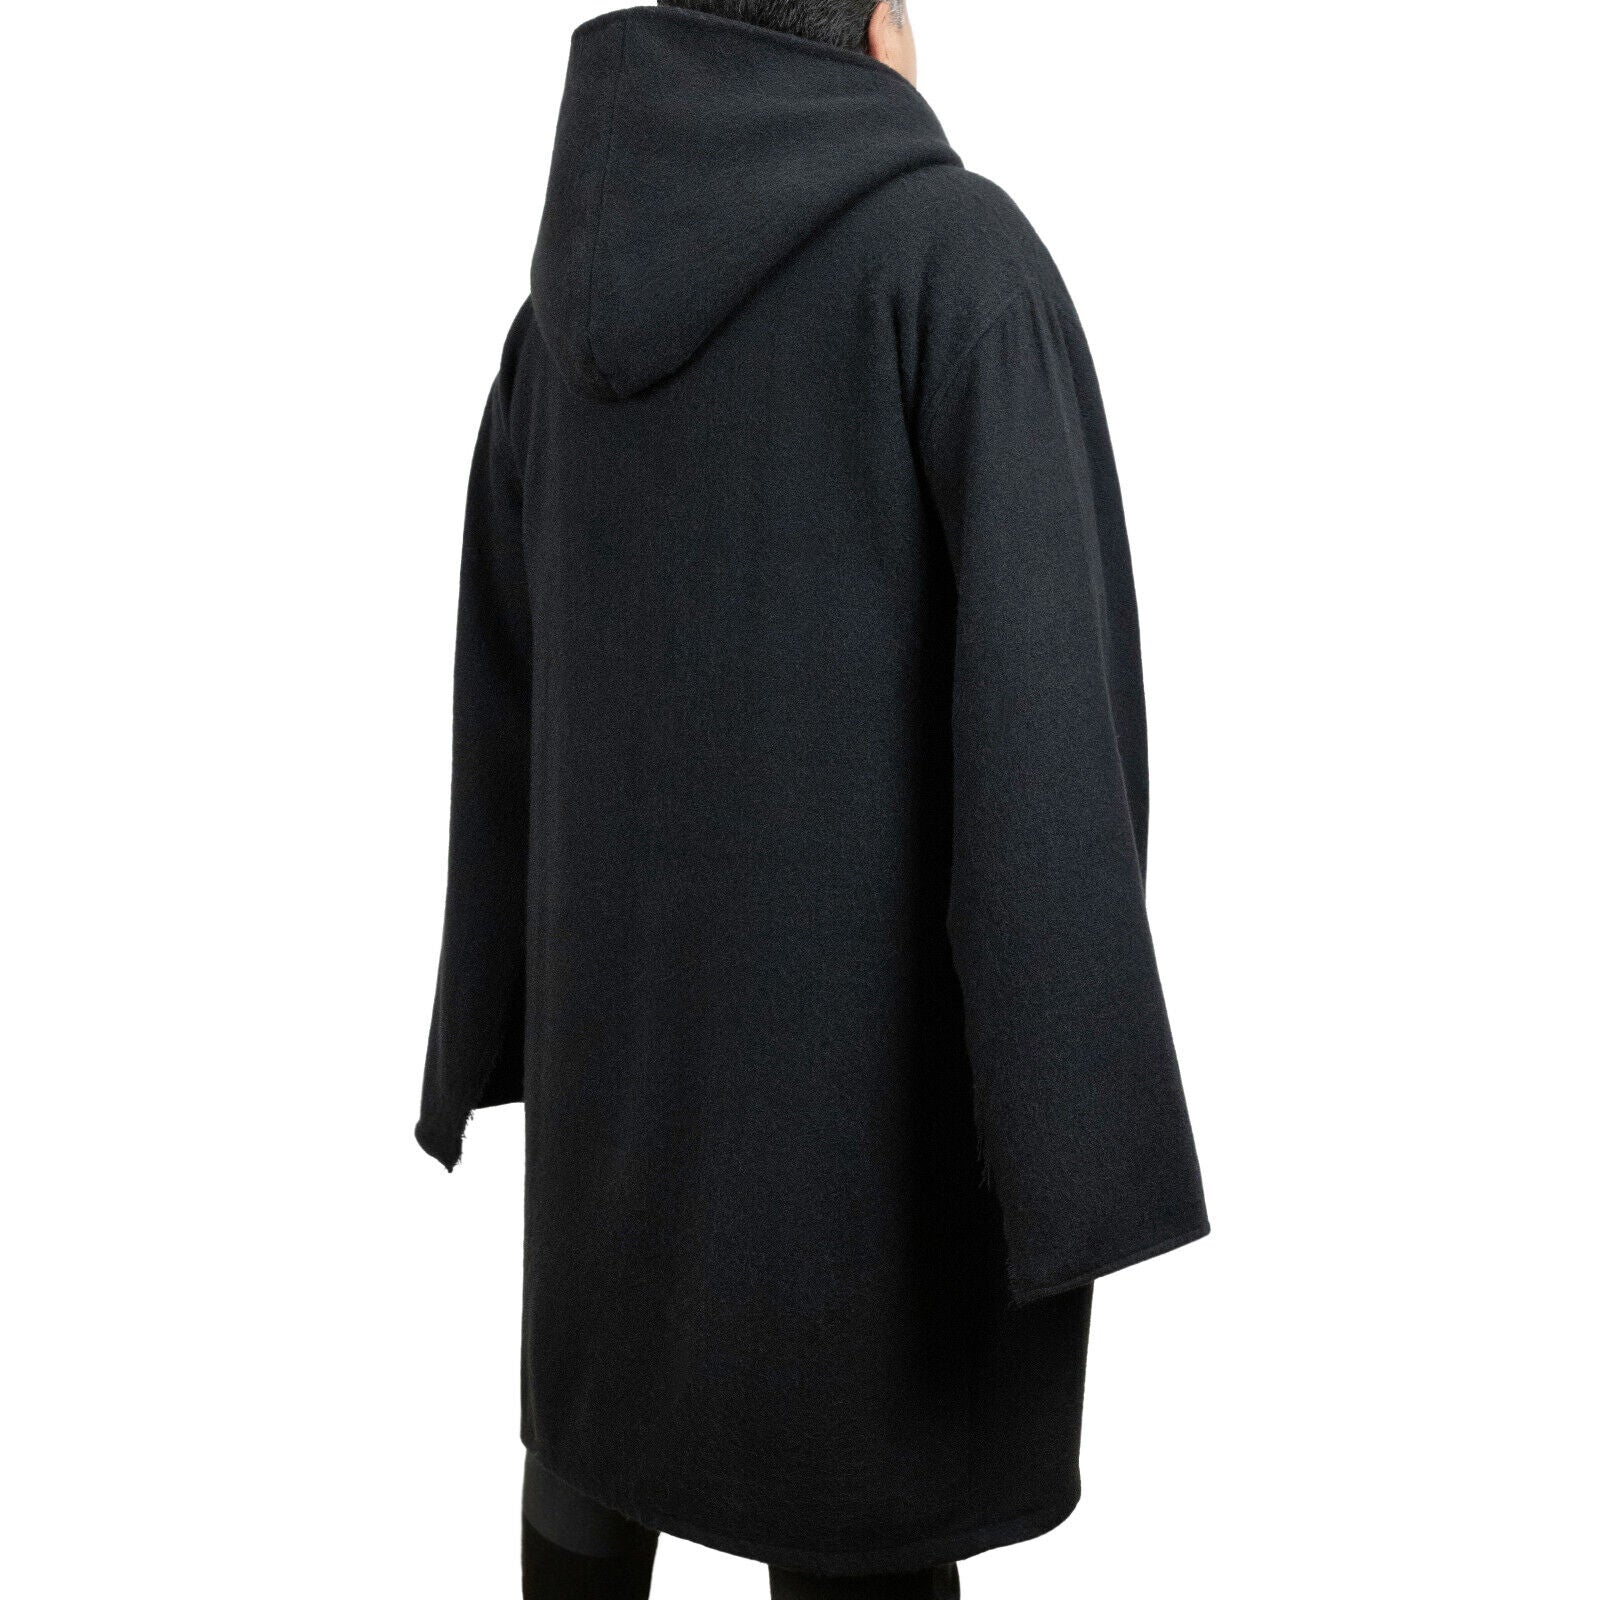 Tangula - Alpaca Wool Unisex South American Handwoven Hooded Coat Jedi Poncho with sleeves - solid black